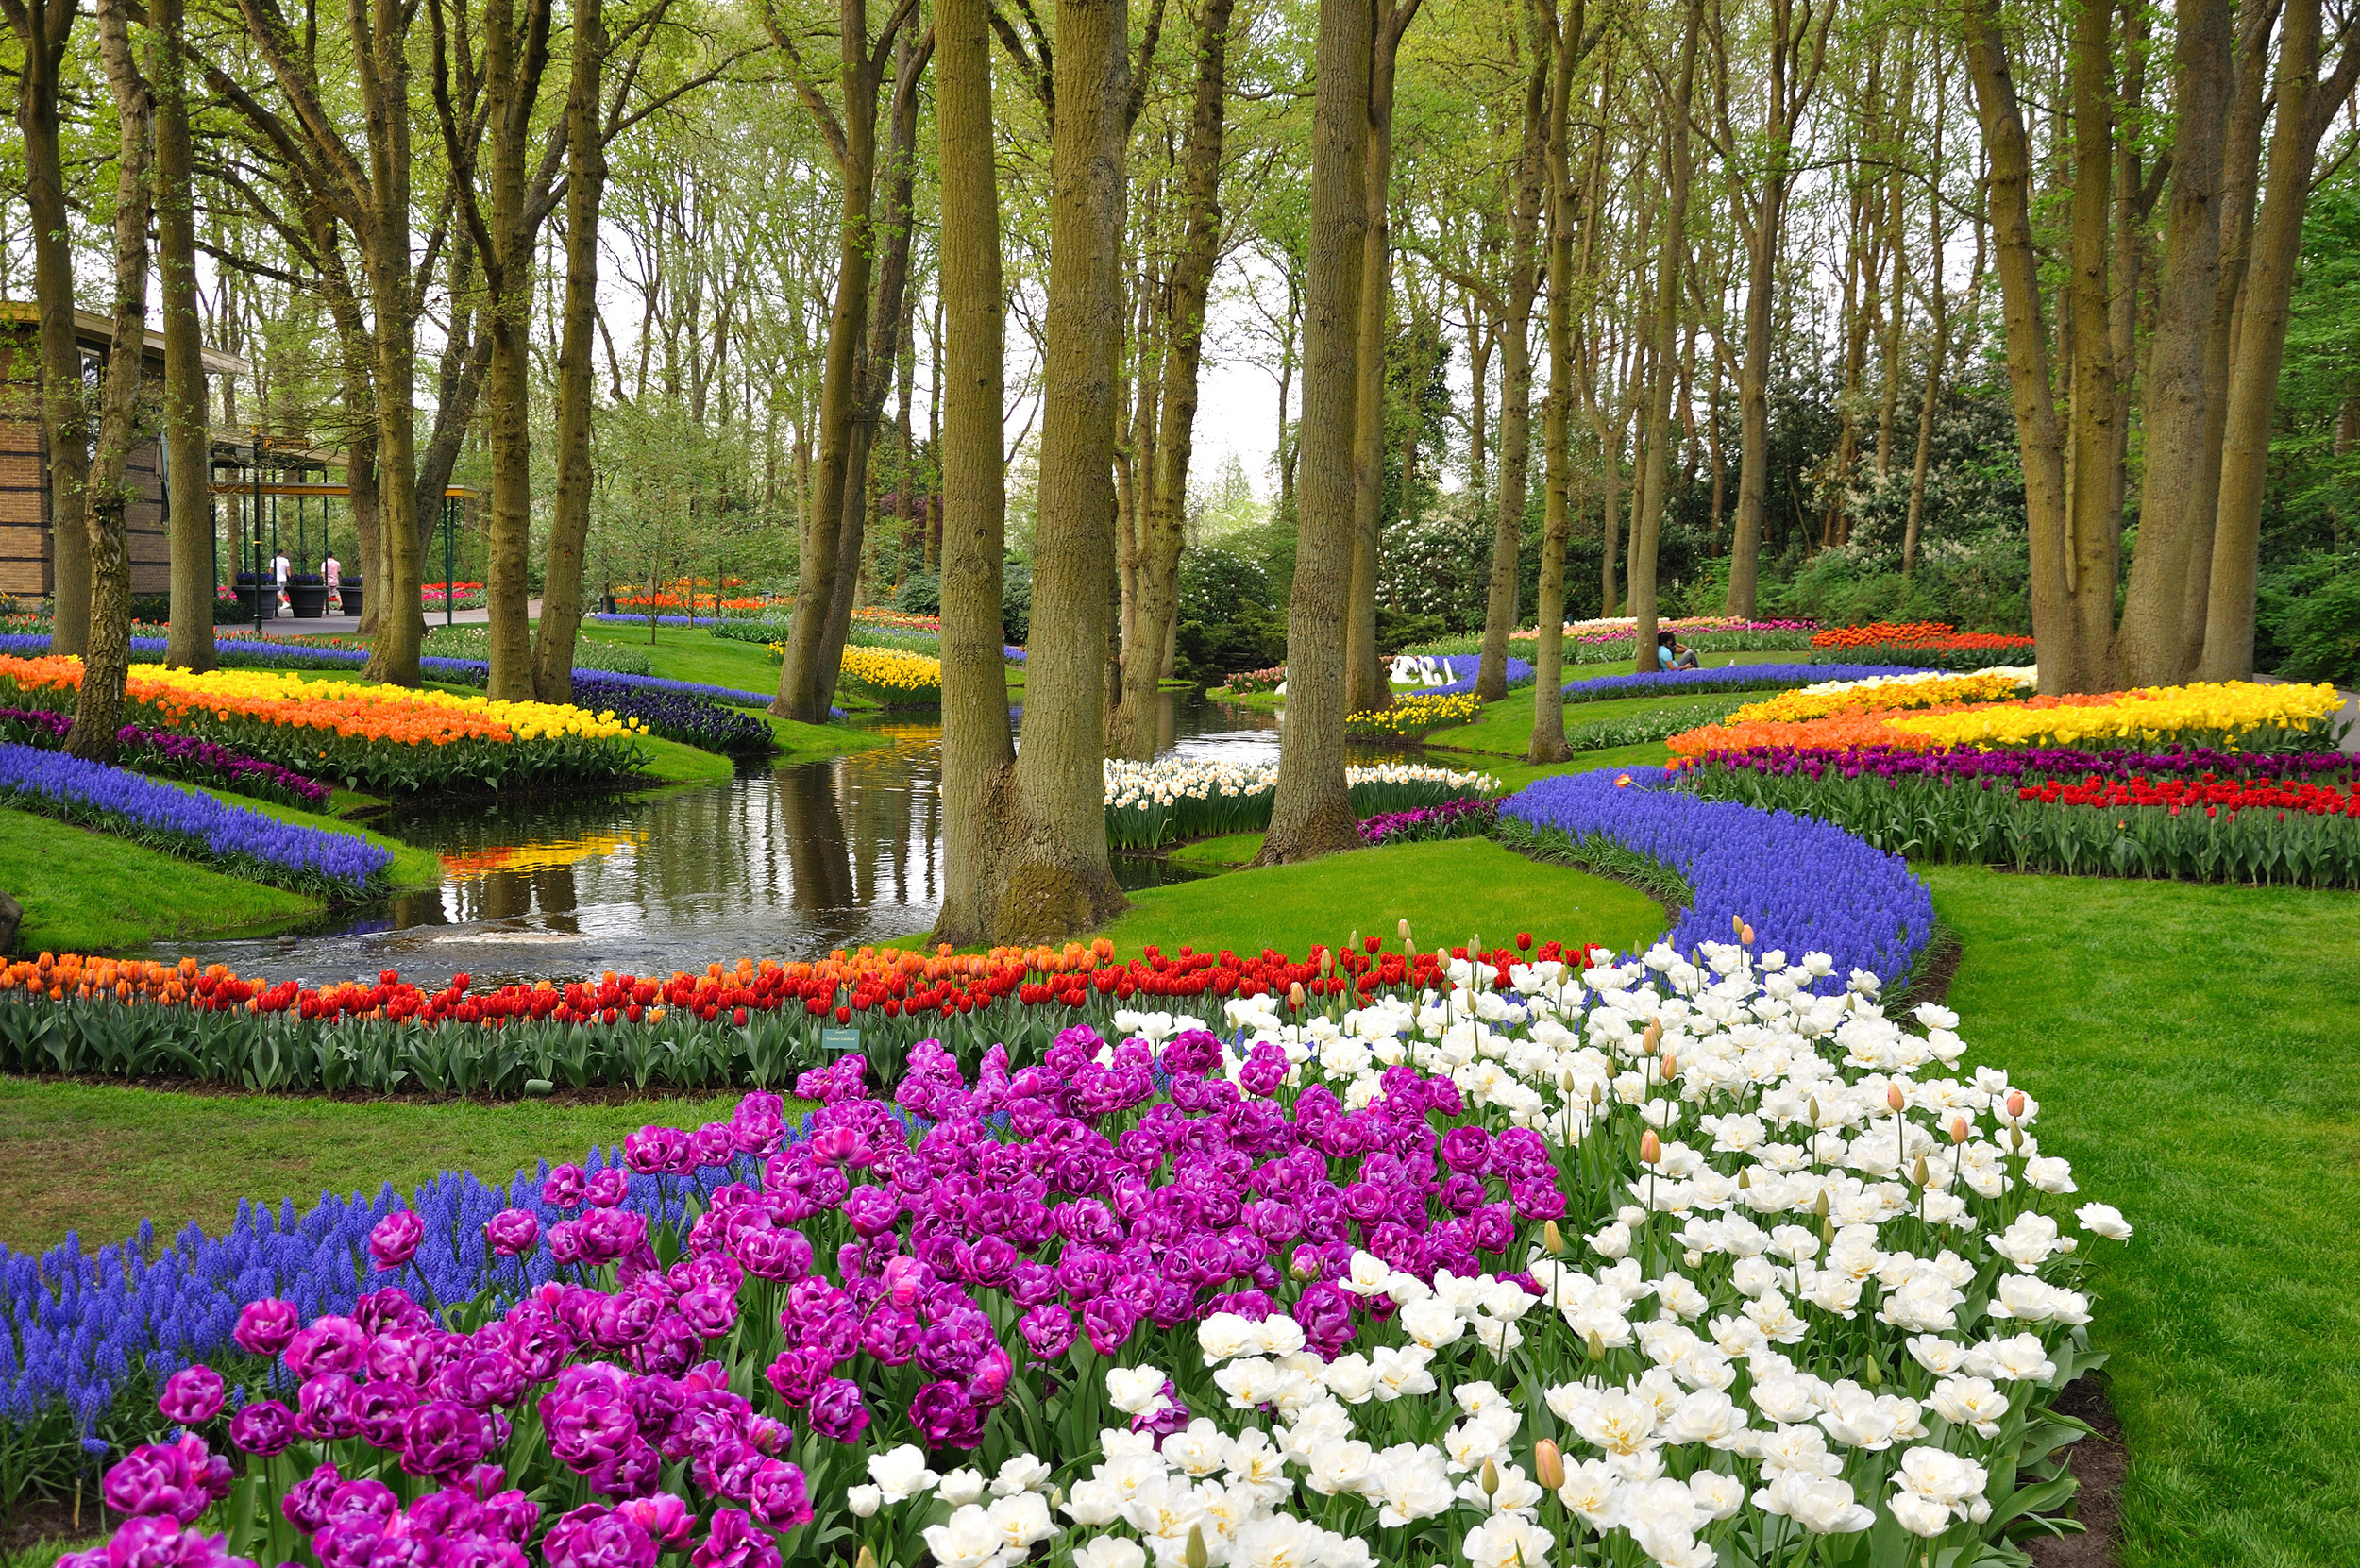 <p>The Netherlands is not only known for its tulips but also houses the world’s largest flower garden, Keukenhof. Located in the Lisse region, it can easily be added to a tulip-focused trip.</p><p>You may also like: <a href='https://www.yardbarker.com/lifestyle/articles/20_skincare_rules_everyone_should_follow/s1__40188013'>20 skincare rules everyone should follow</a></p>